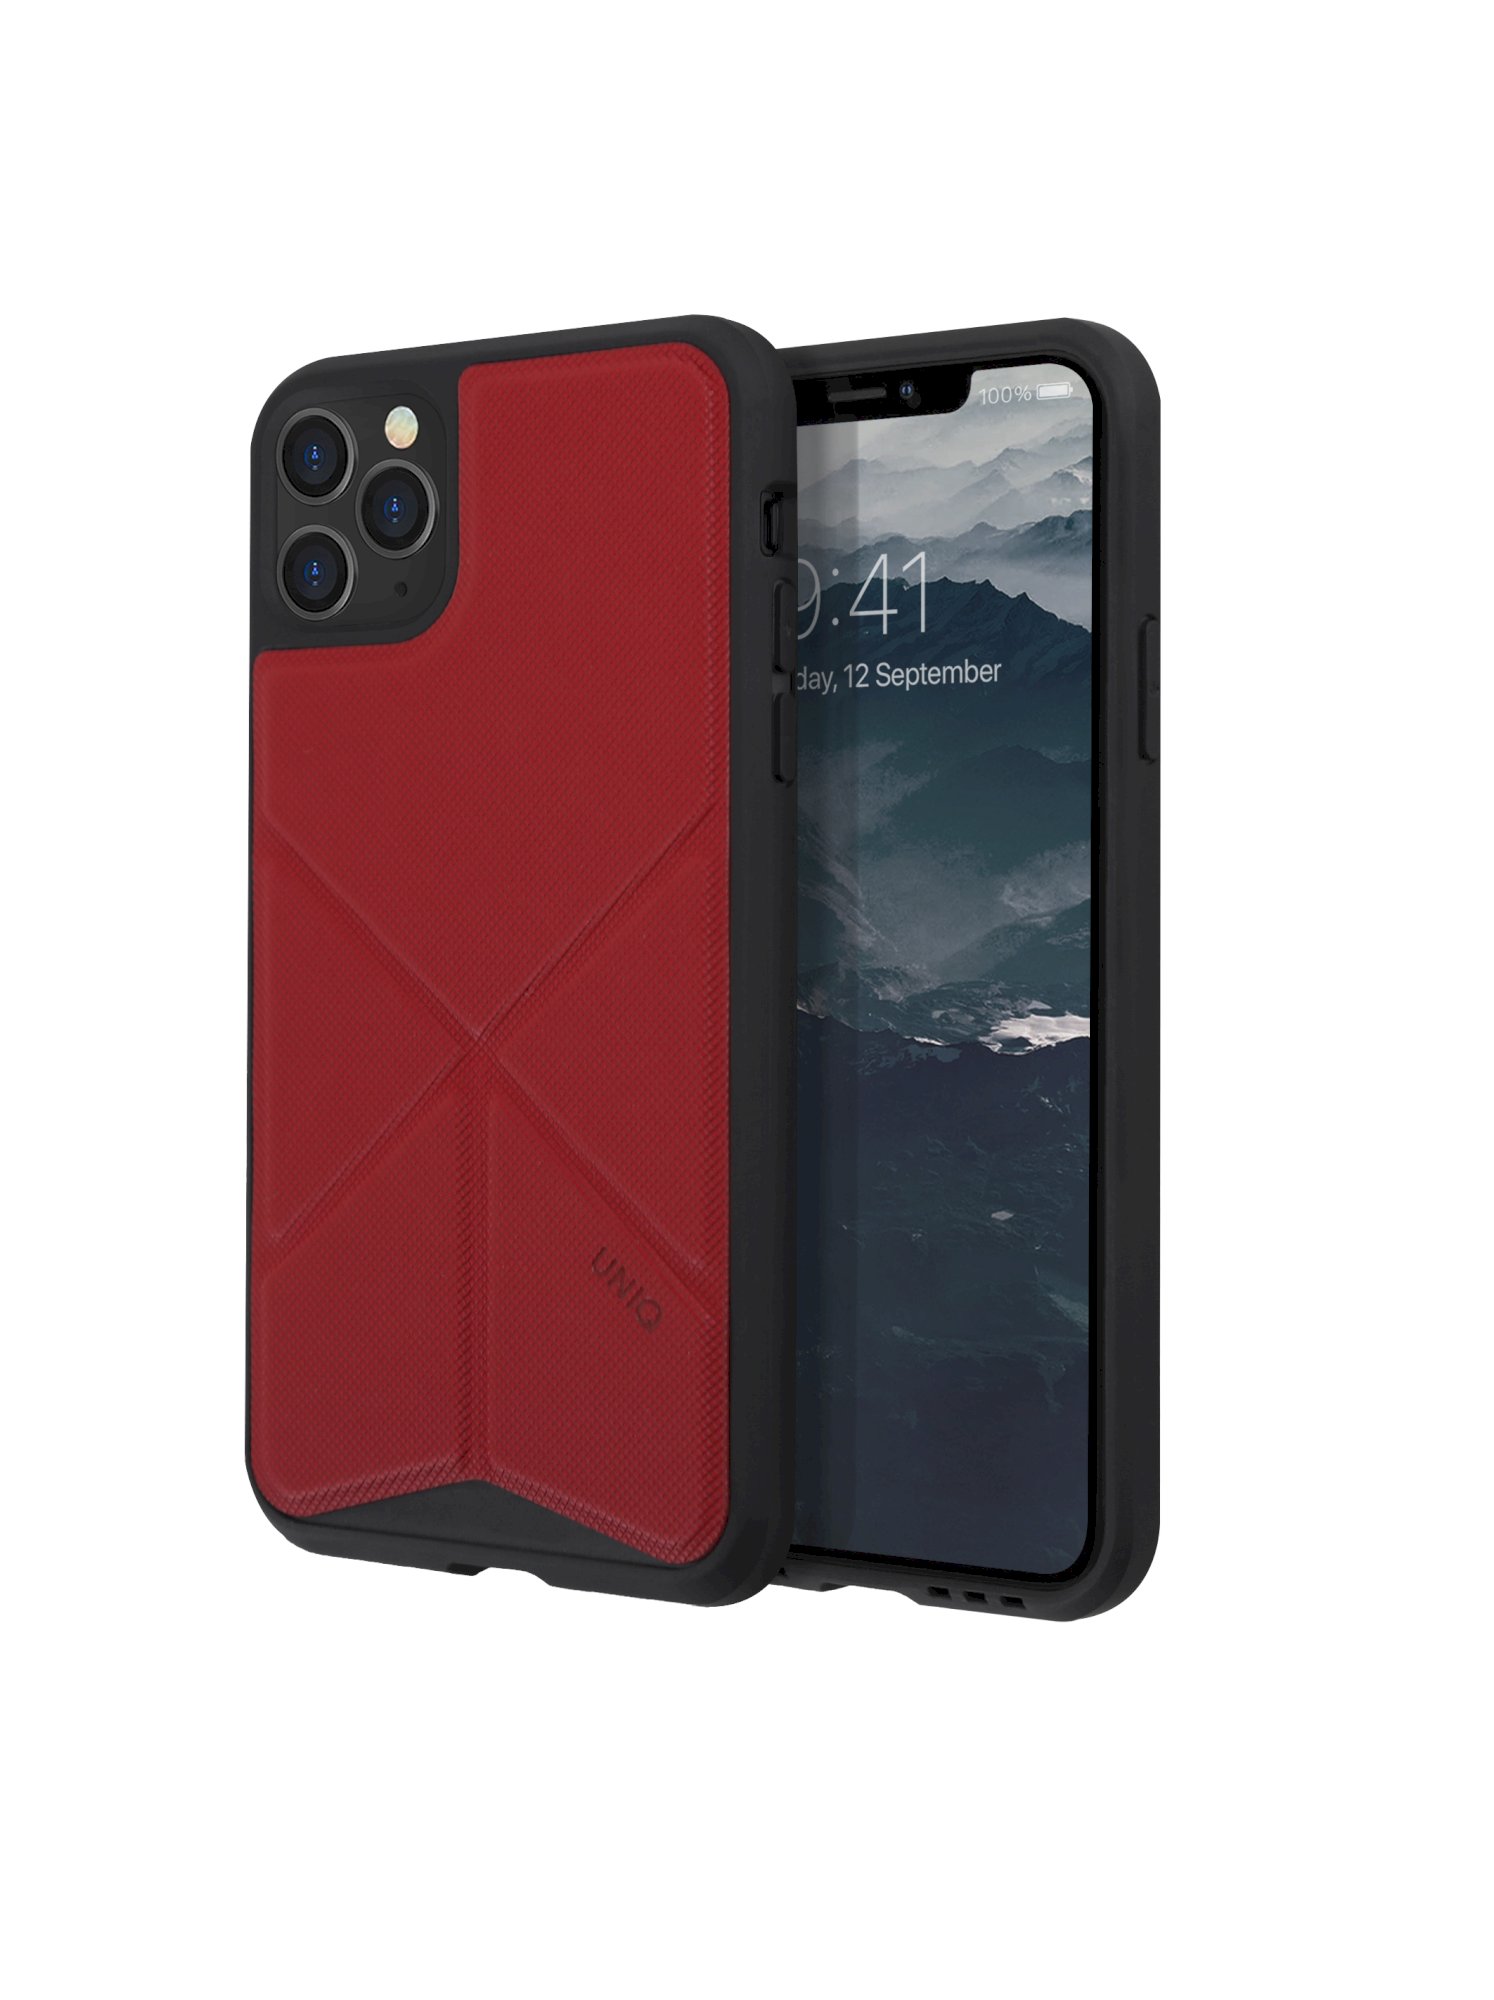 iPhone 11 Pro Max, case transforma, stand up fury racer, red